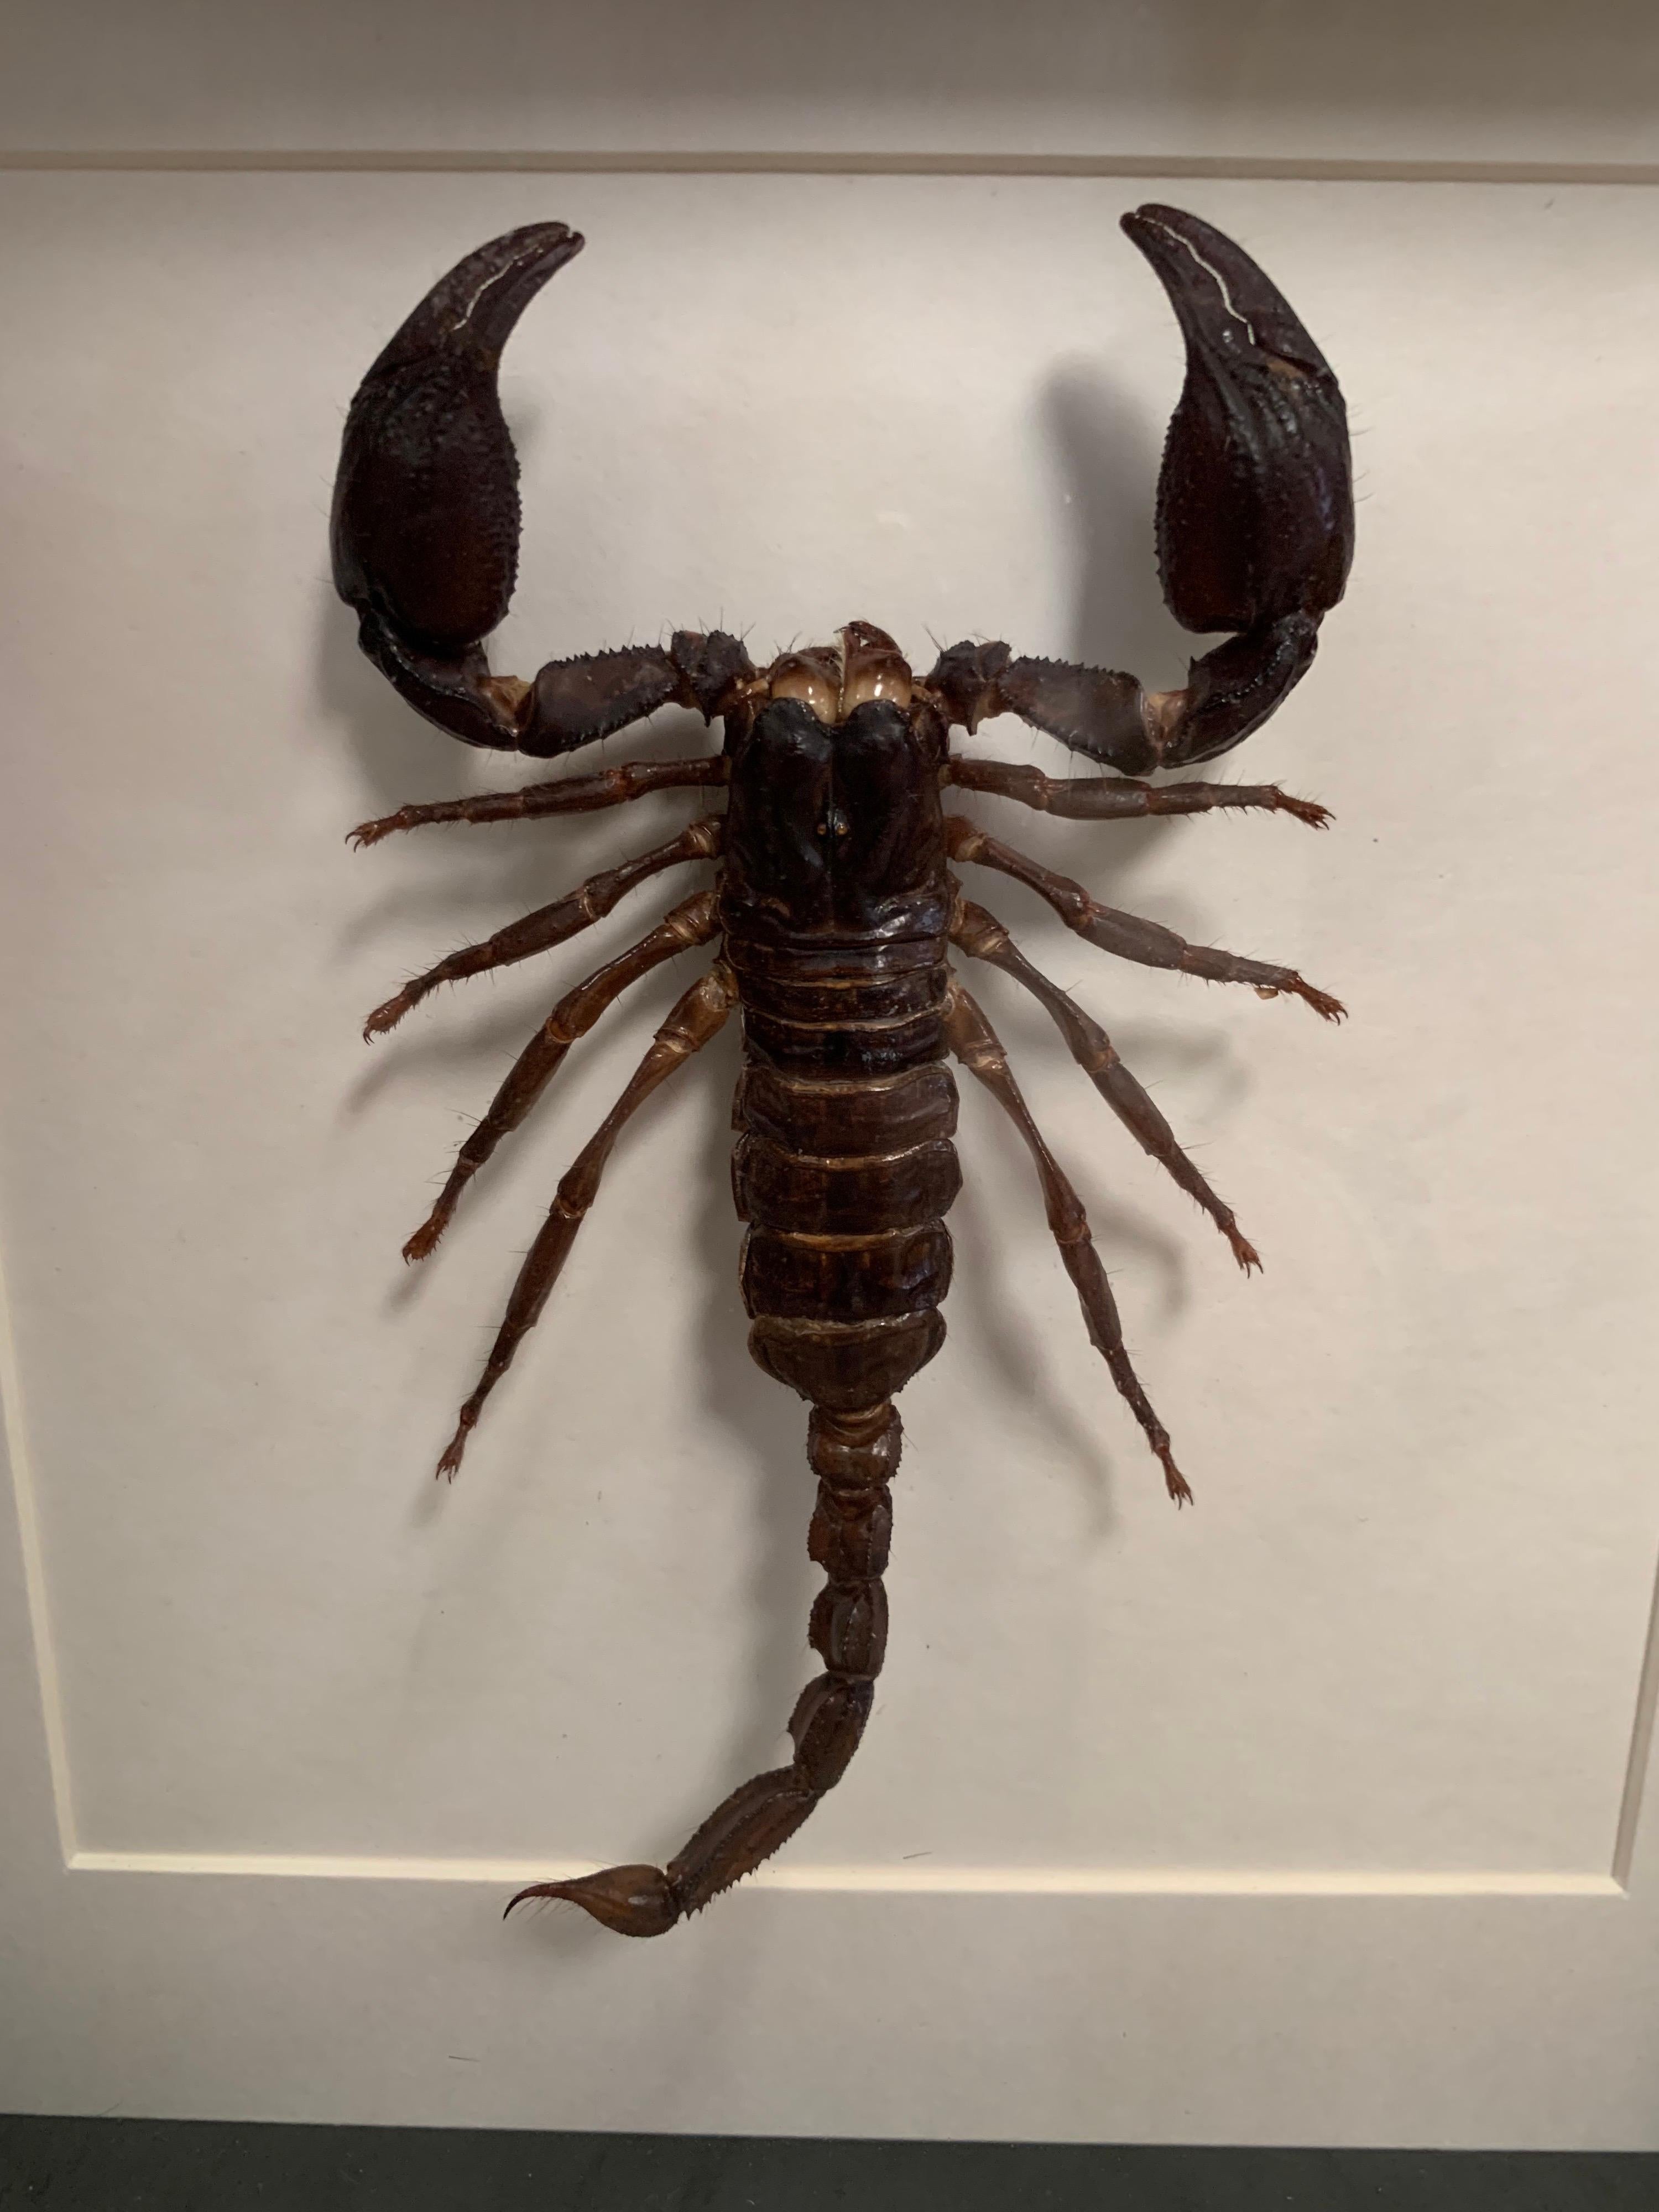 Very nice piece this large black / brown scorpion, which has been skilfully prepared. The details are absolutely stunning. The glass and wood case can be hanged or placed like a picture stand. Non Cites species.

The case is 25 cm x 25 cm x 4.5 cm.